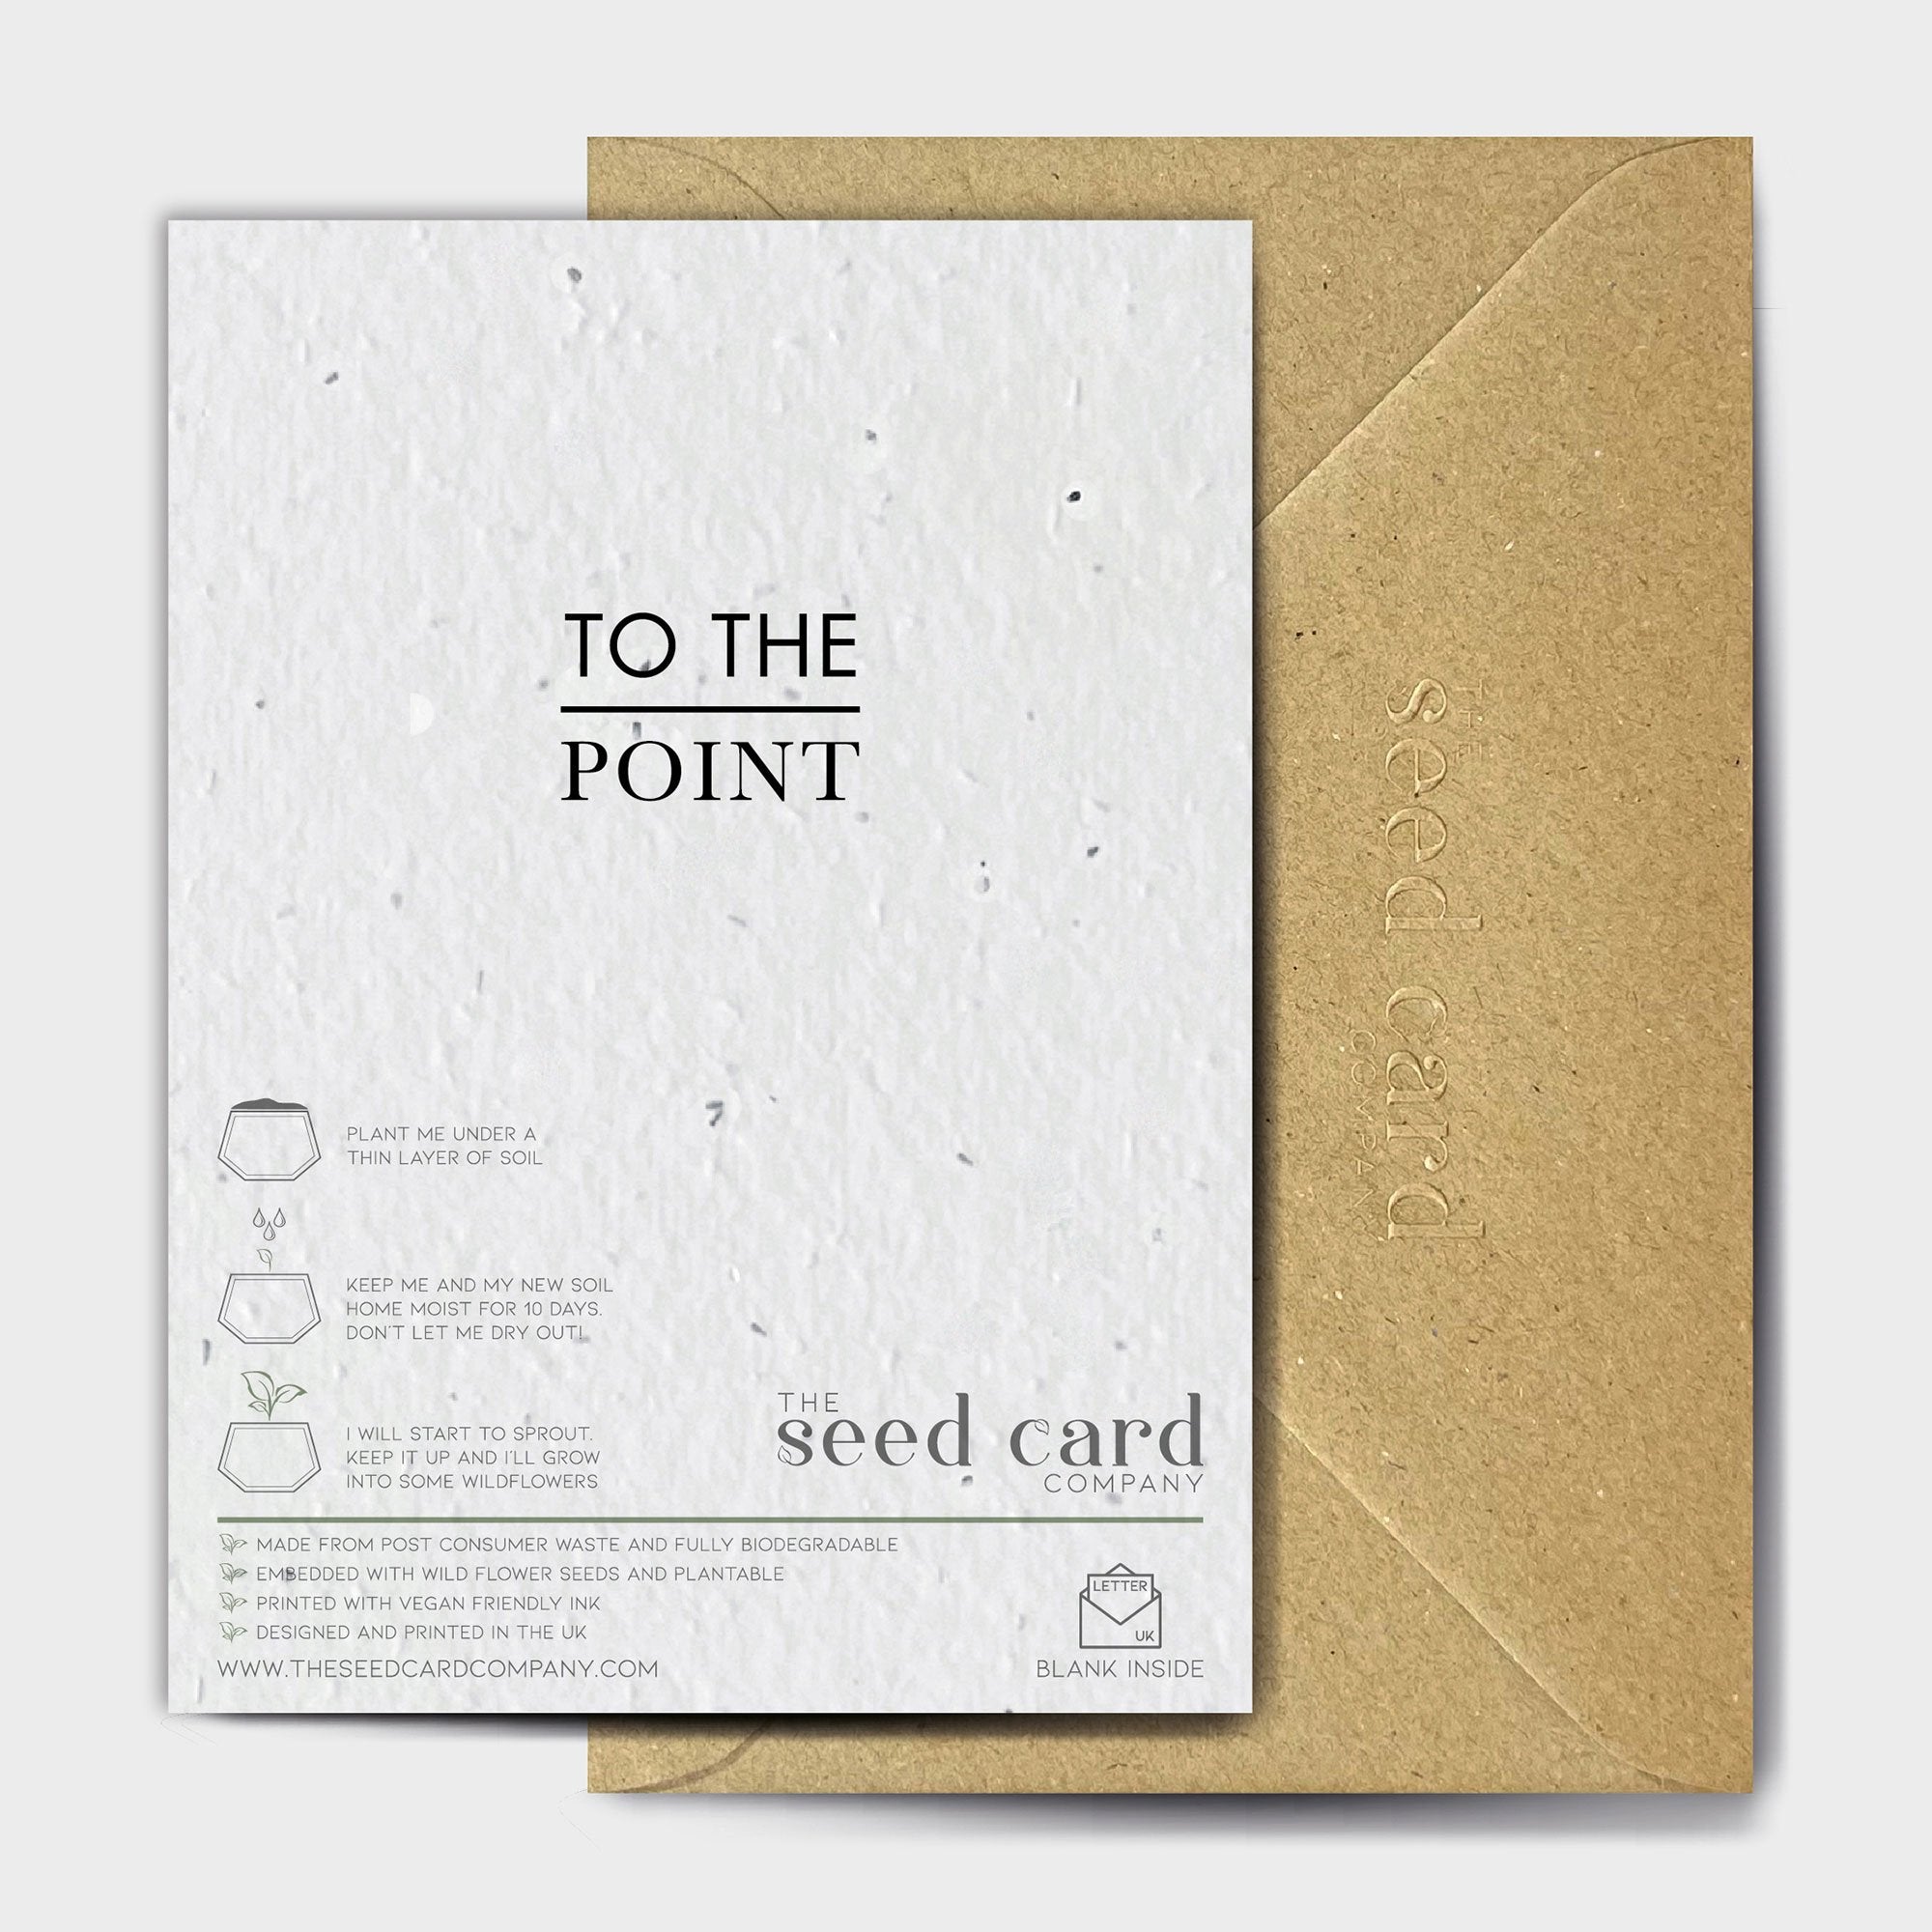 Shop online Who Doesn't Love Comic Sans? - 100% biodegradable seed-embedded cards Shop -The Seed Card Company